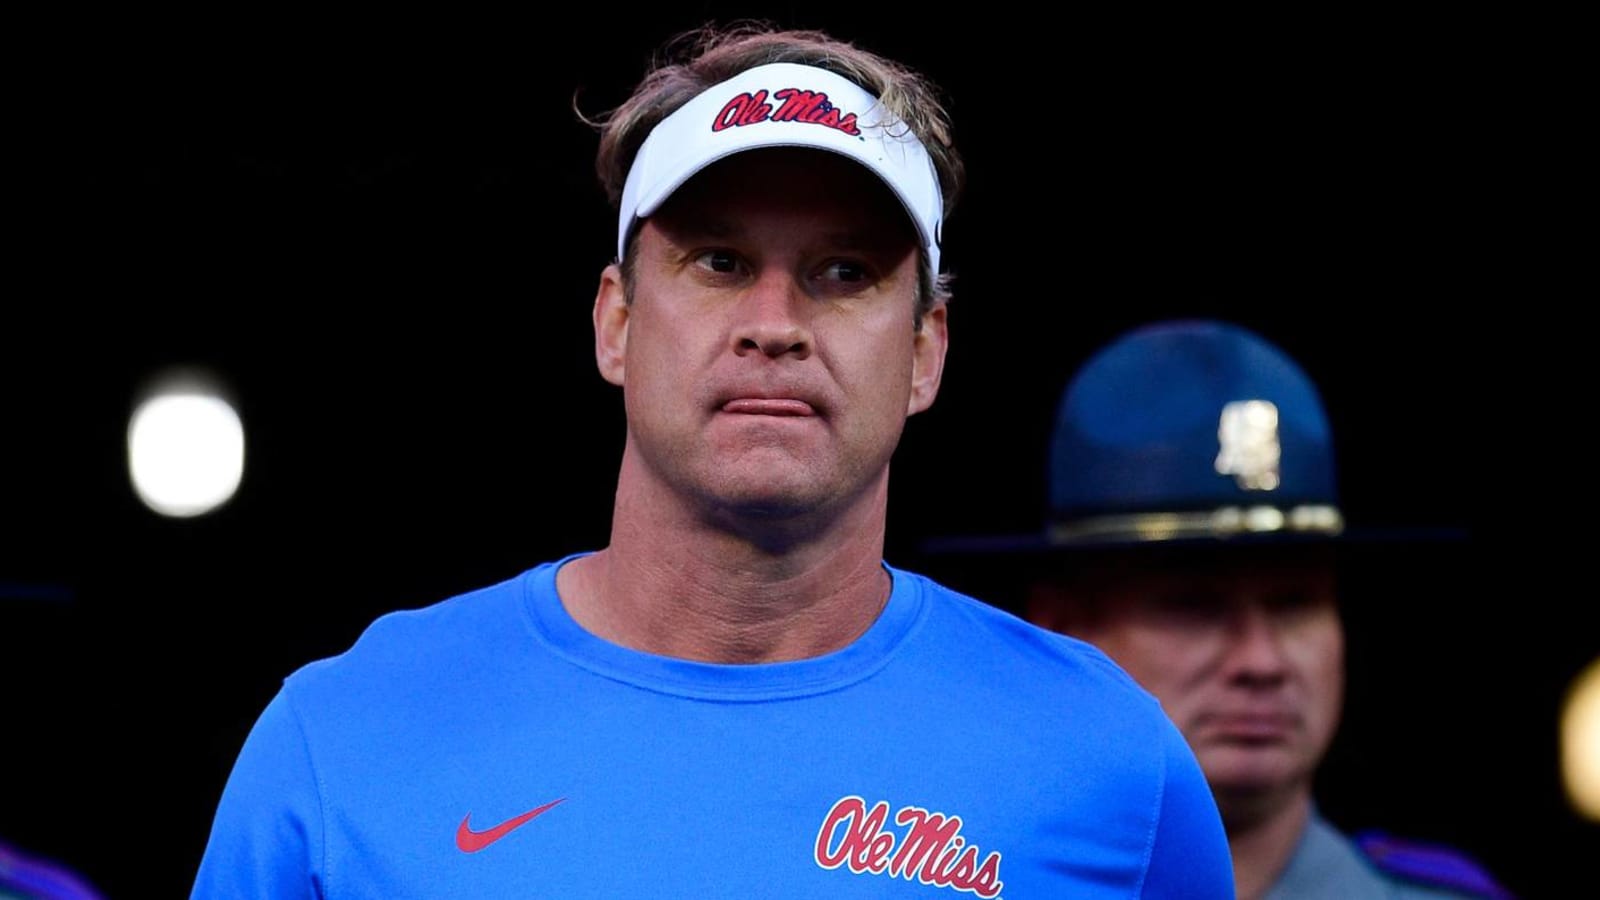 Lane Kiffin jabs Brian Kelly over his dancing videos